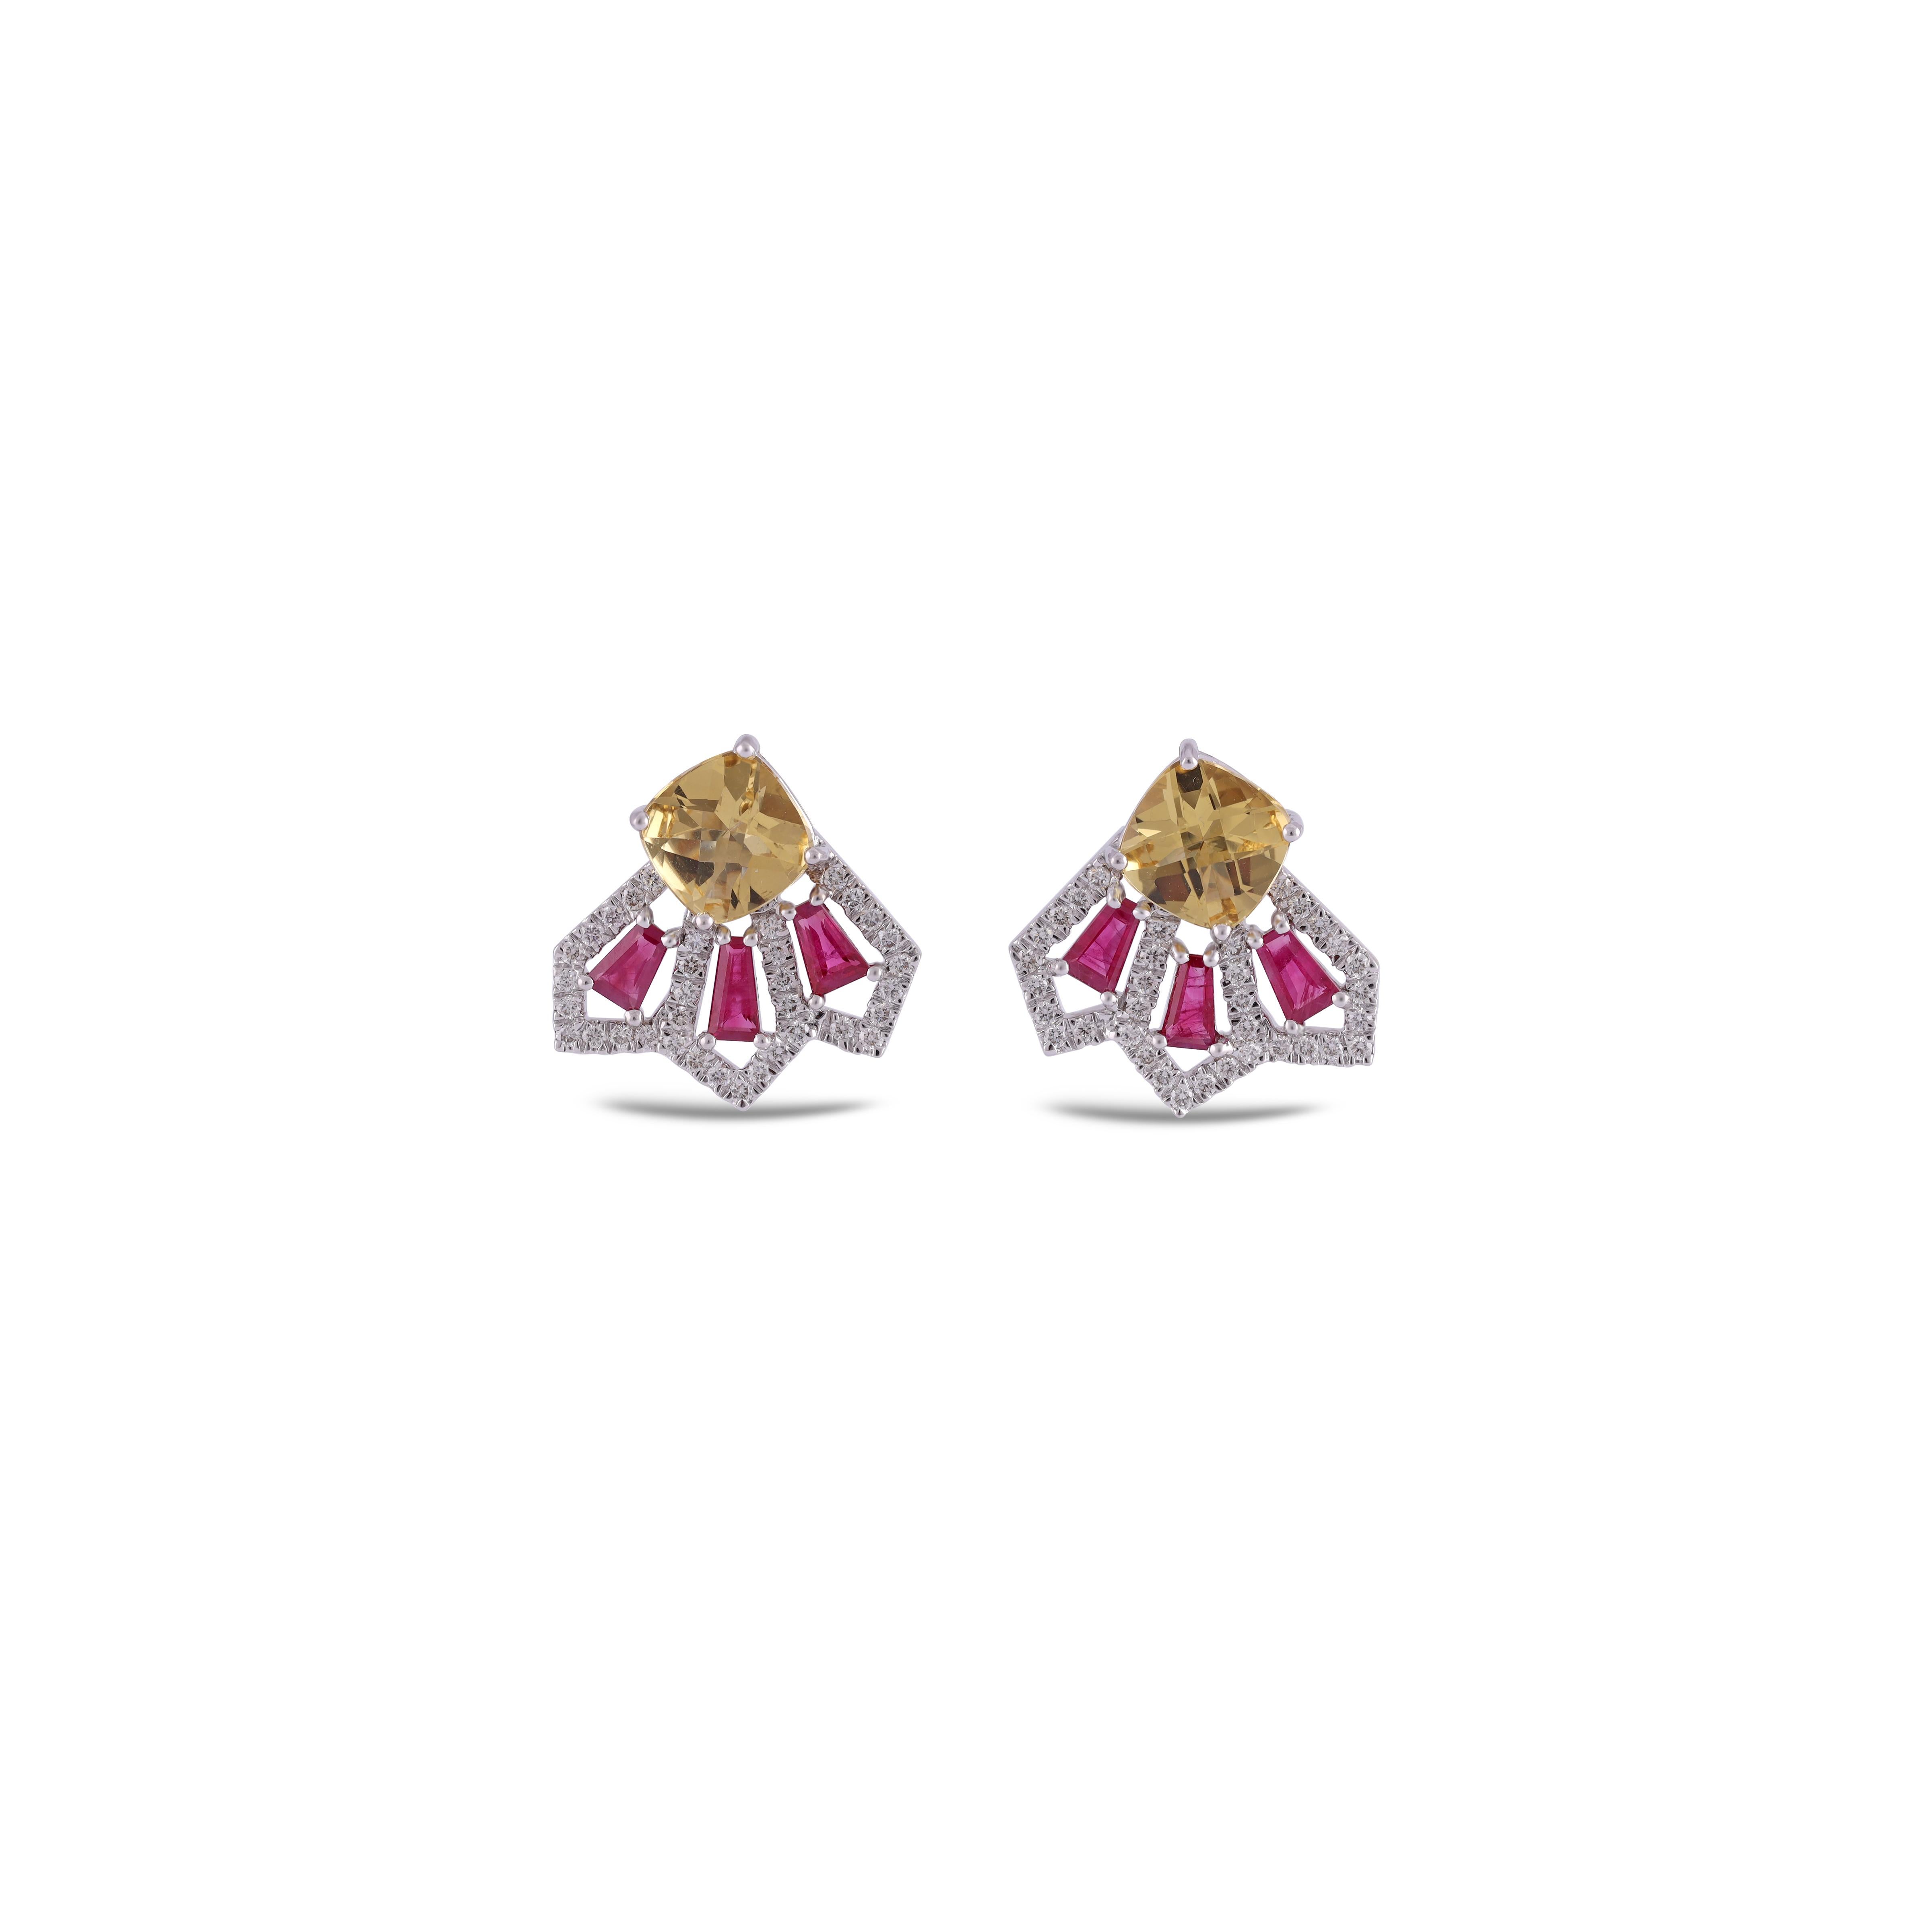 2.30 Carat Clear Ruby & Diamond Earring Studs in 18k Gold

RUBY : 1.03 Carat
DIAMOND : 0.42 Carat
Yello Beral : 2.30 Carat



Custom Services
Available in Different  gem stones 
Request Customization

